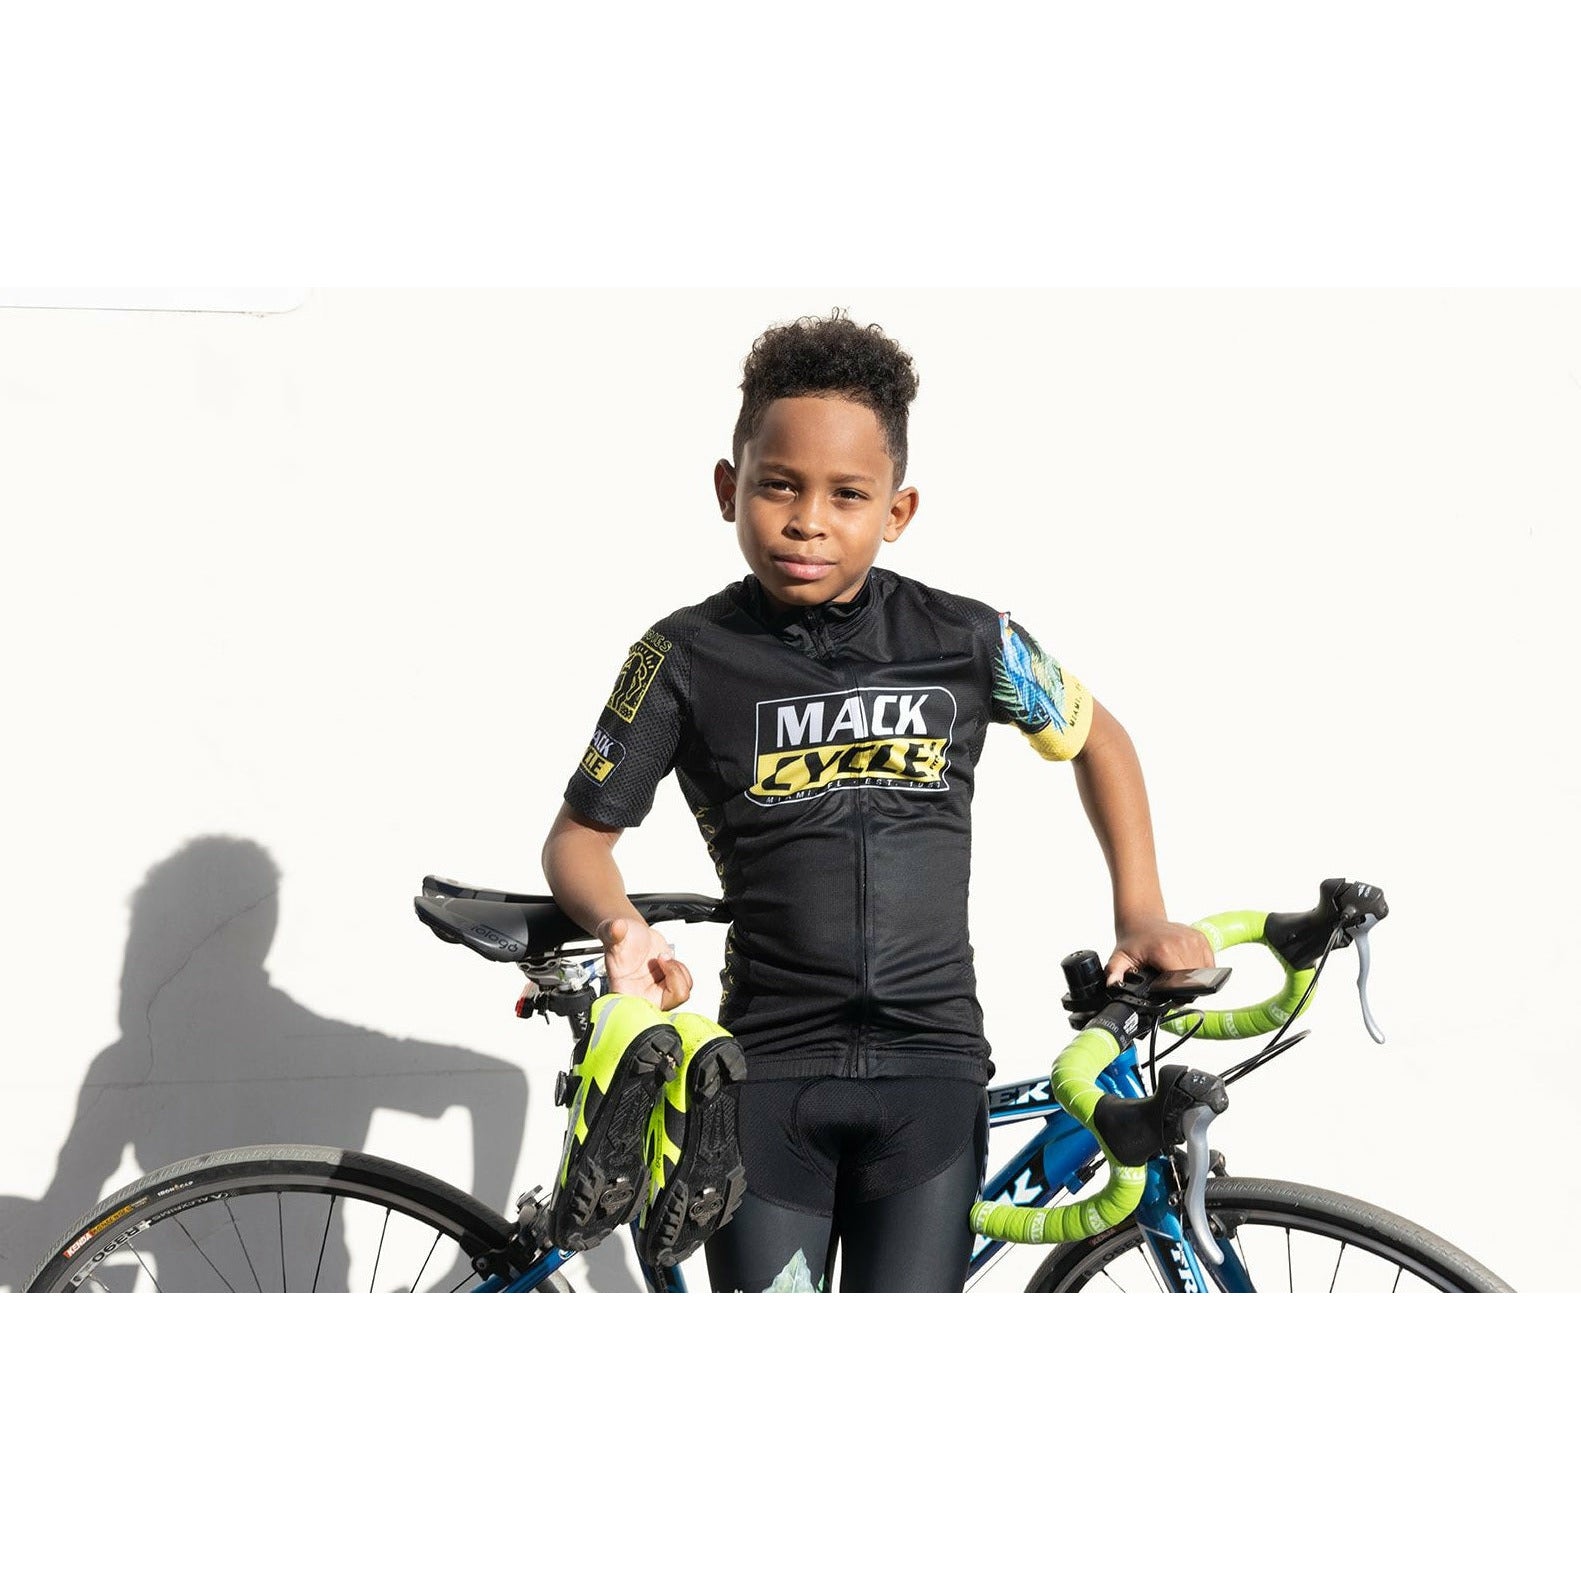 Mack Cycle Parrots - Kid's Cycling Jersey